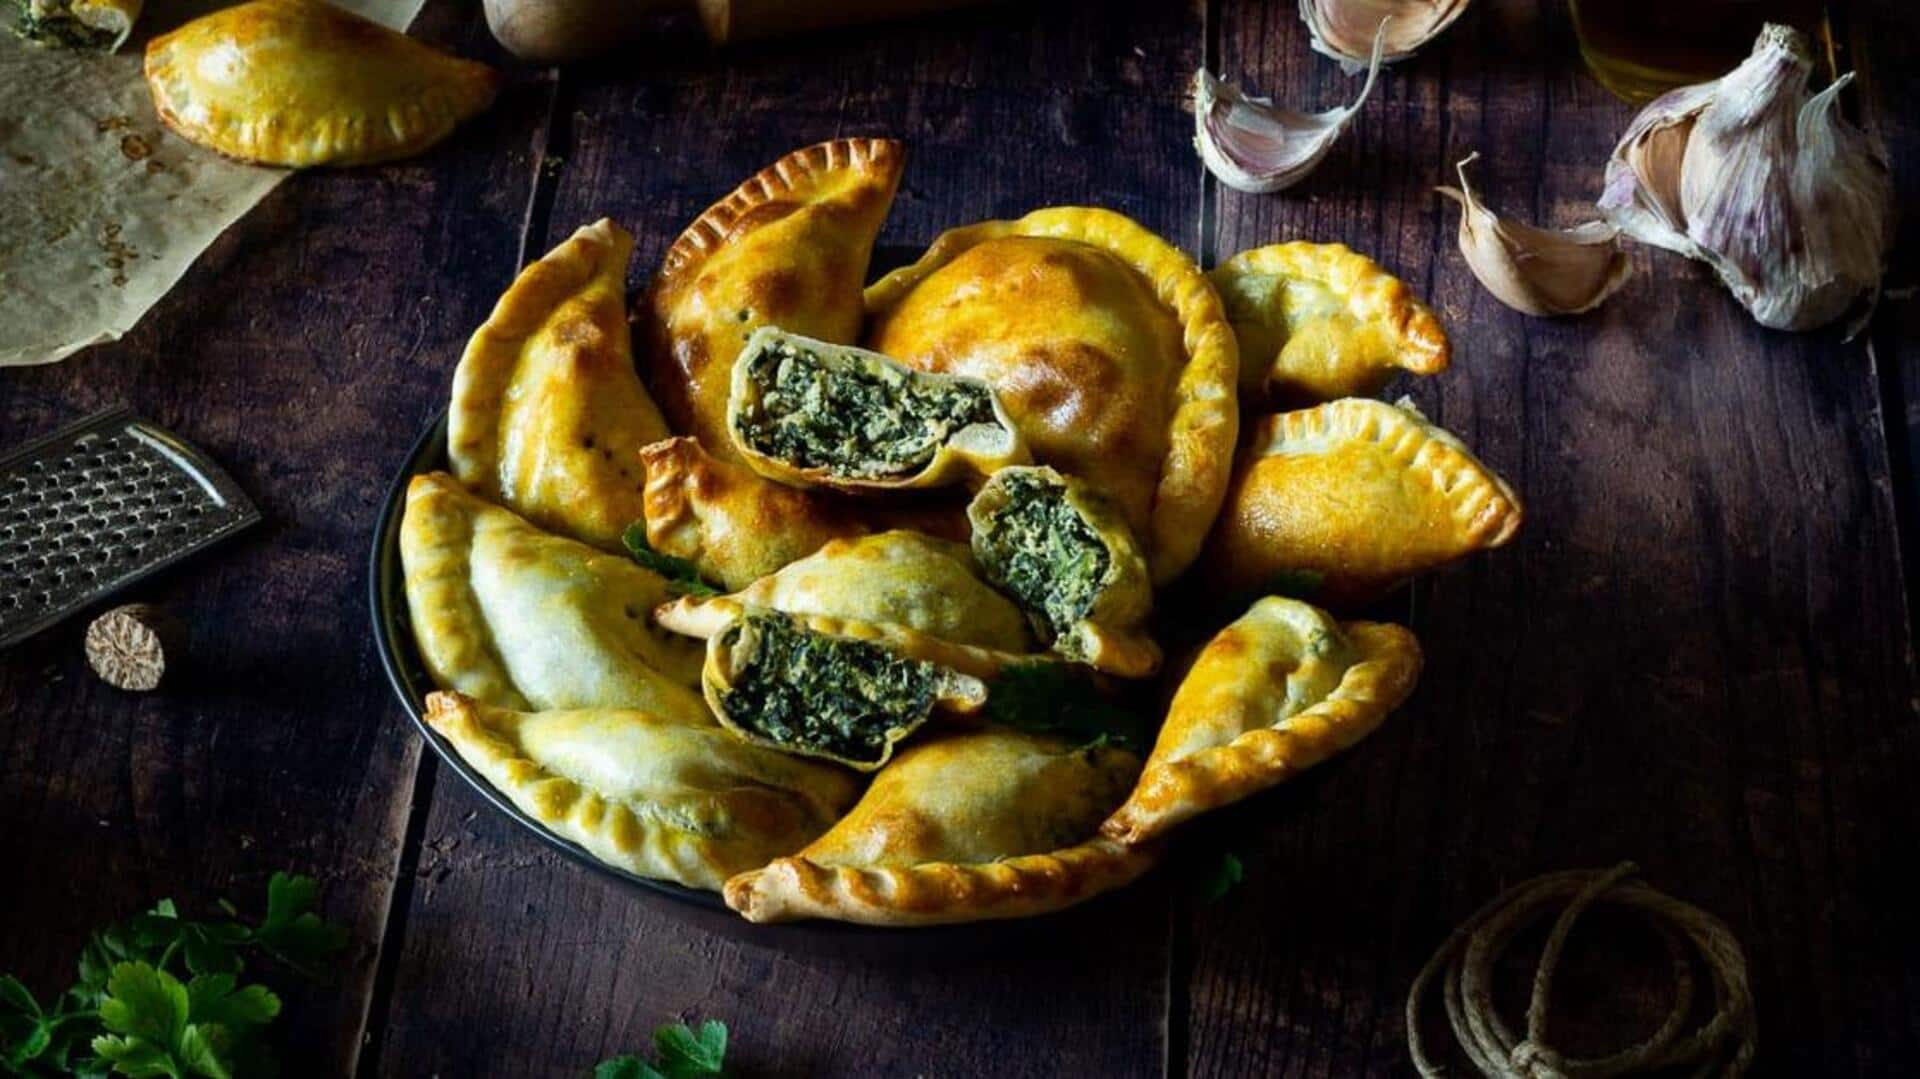 Impress your guests with this delicious Argentine spinach empanadas recipe